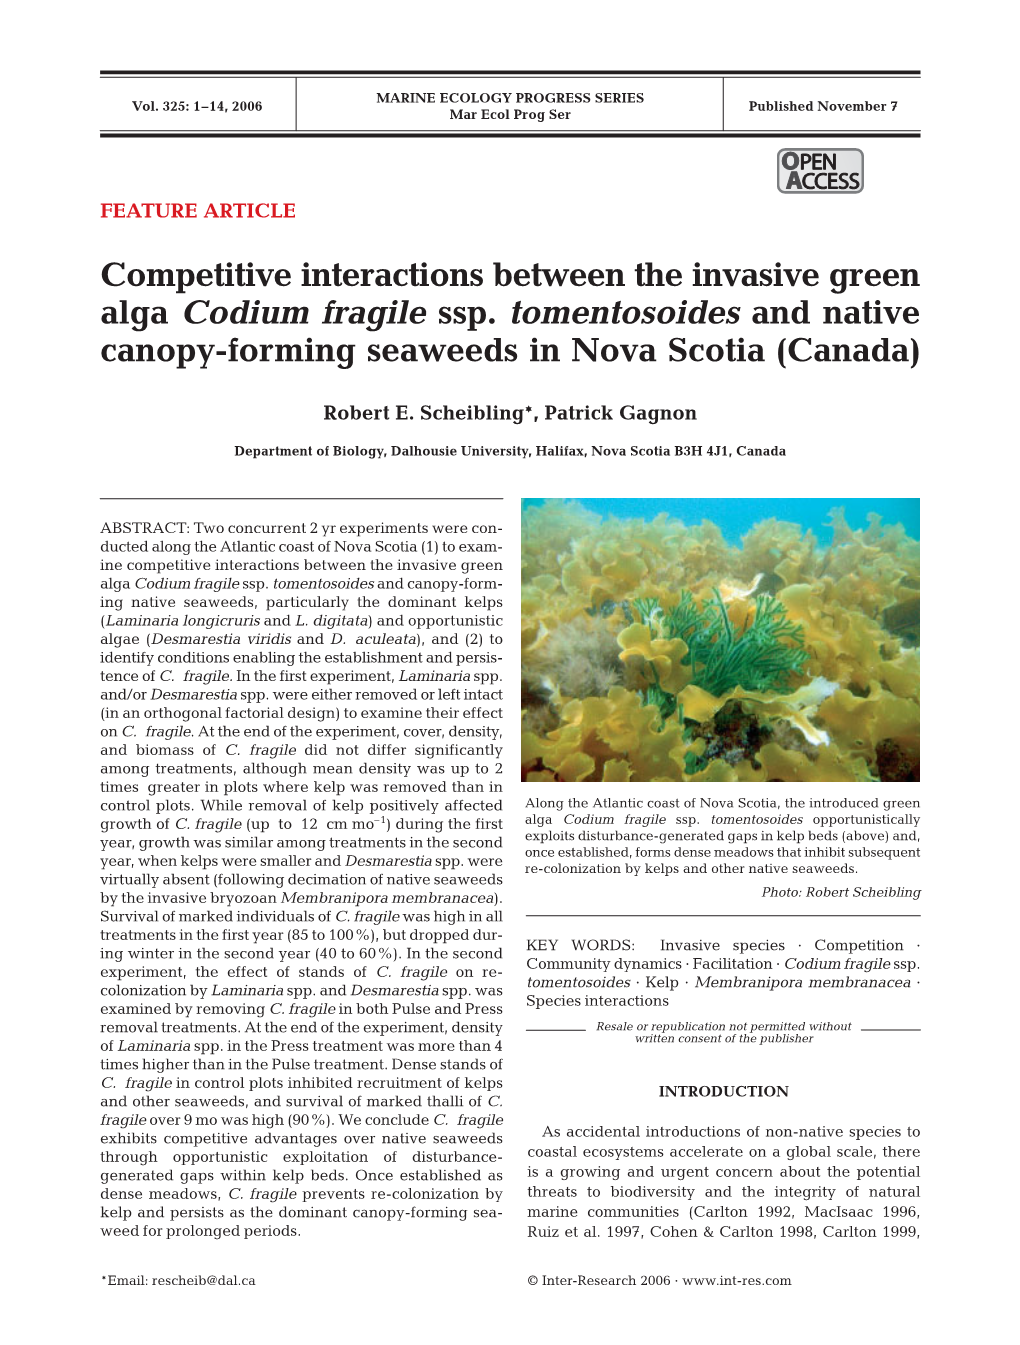 Competitive Interactions Between the Invasive Green Alga Codium Fragile Ssp. Tomentosoides and Native Canopy-Forming Seaweeds in Nova Scotia (Canada)